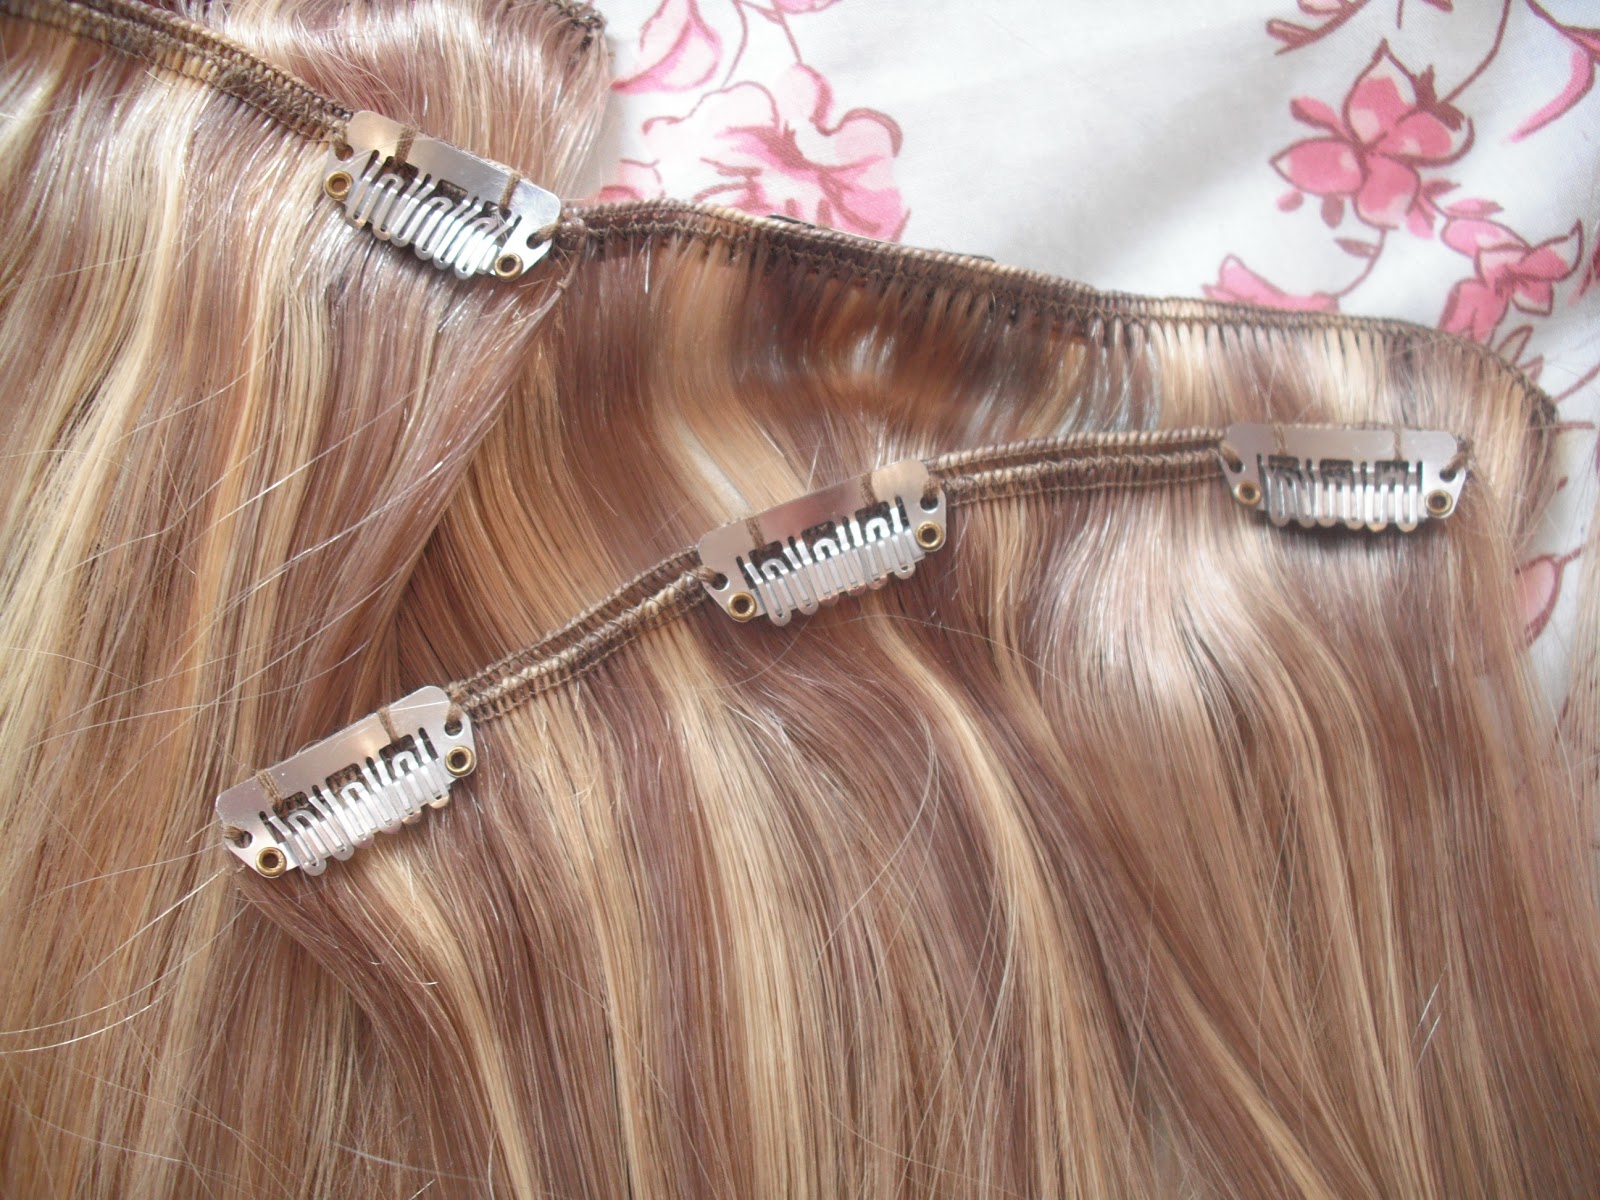 Clip In Hair Extensions
2. Remy Human Hair Extensions - wide 8